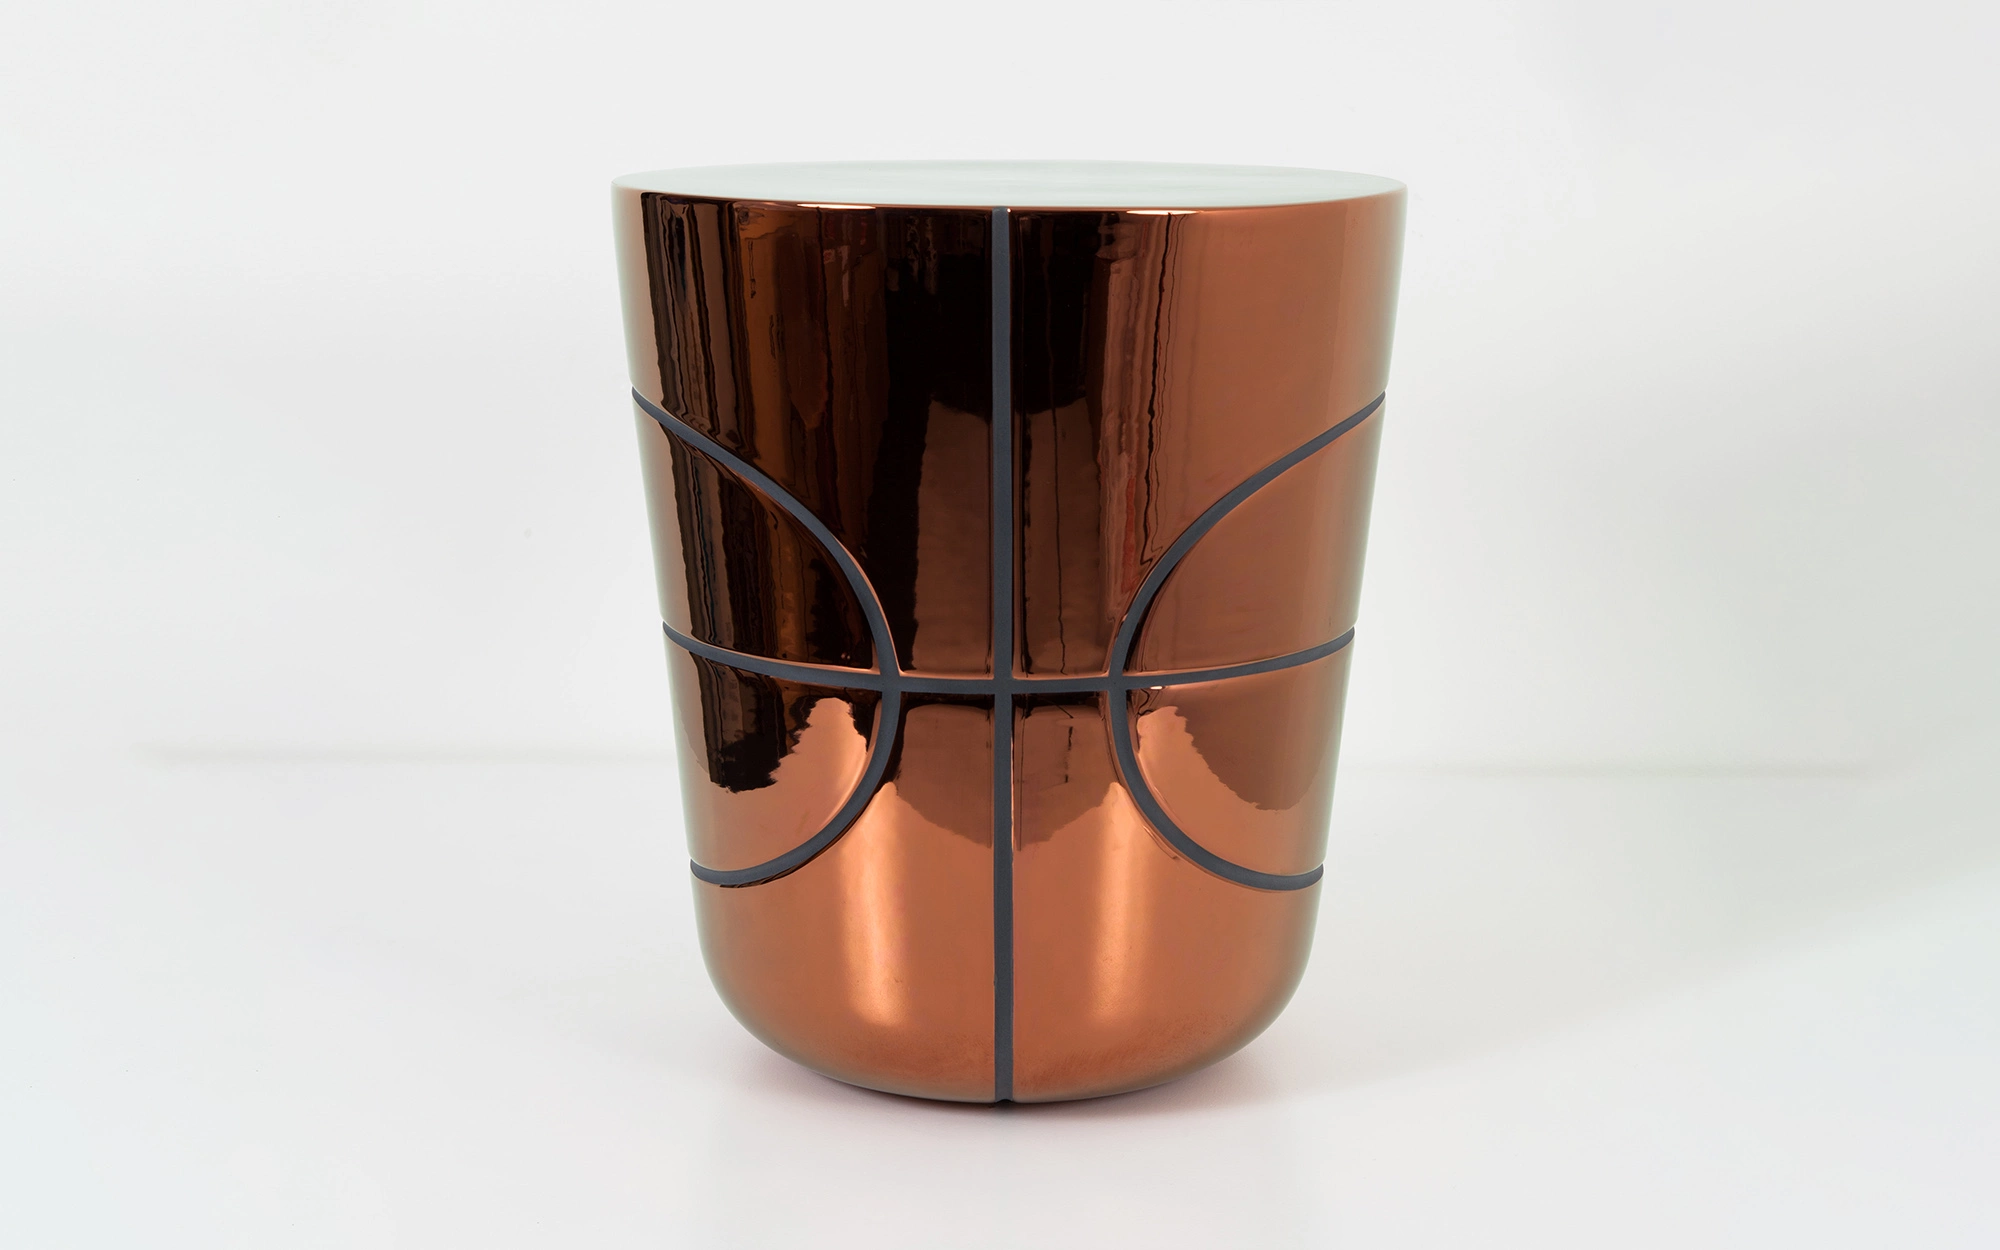 Game On Side Table - Copper Ceramic - Jaime Hayon - side-table - Galerie kreo